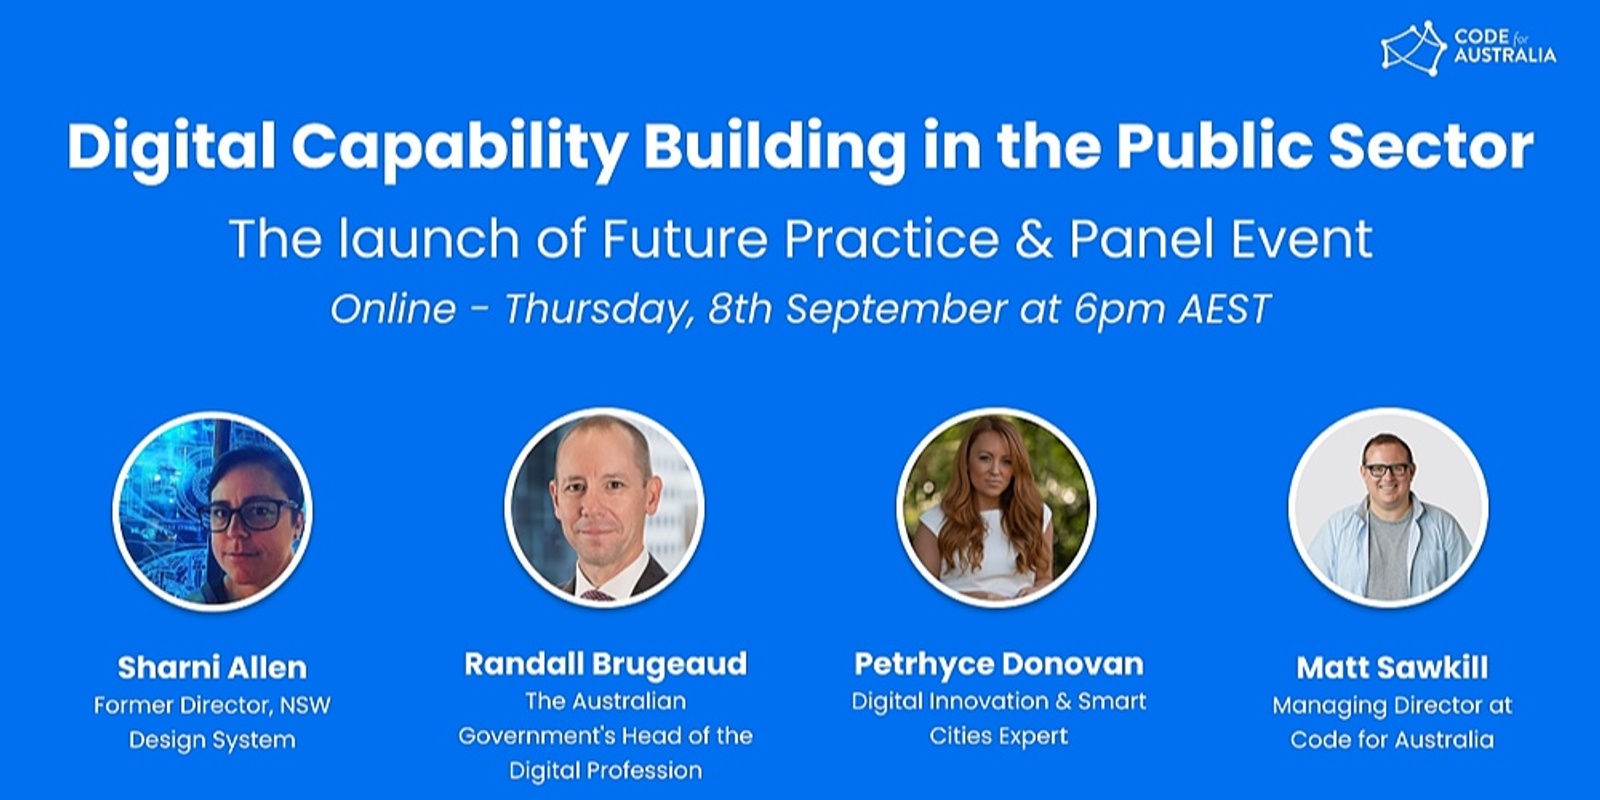 Banner image for Digital Capability Building in the Public Sector: Panel Event & Future Practice Launch